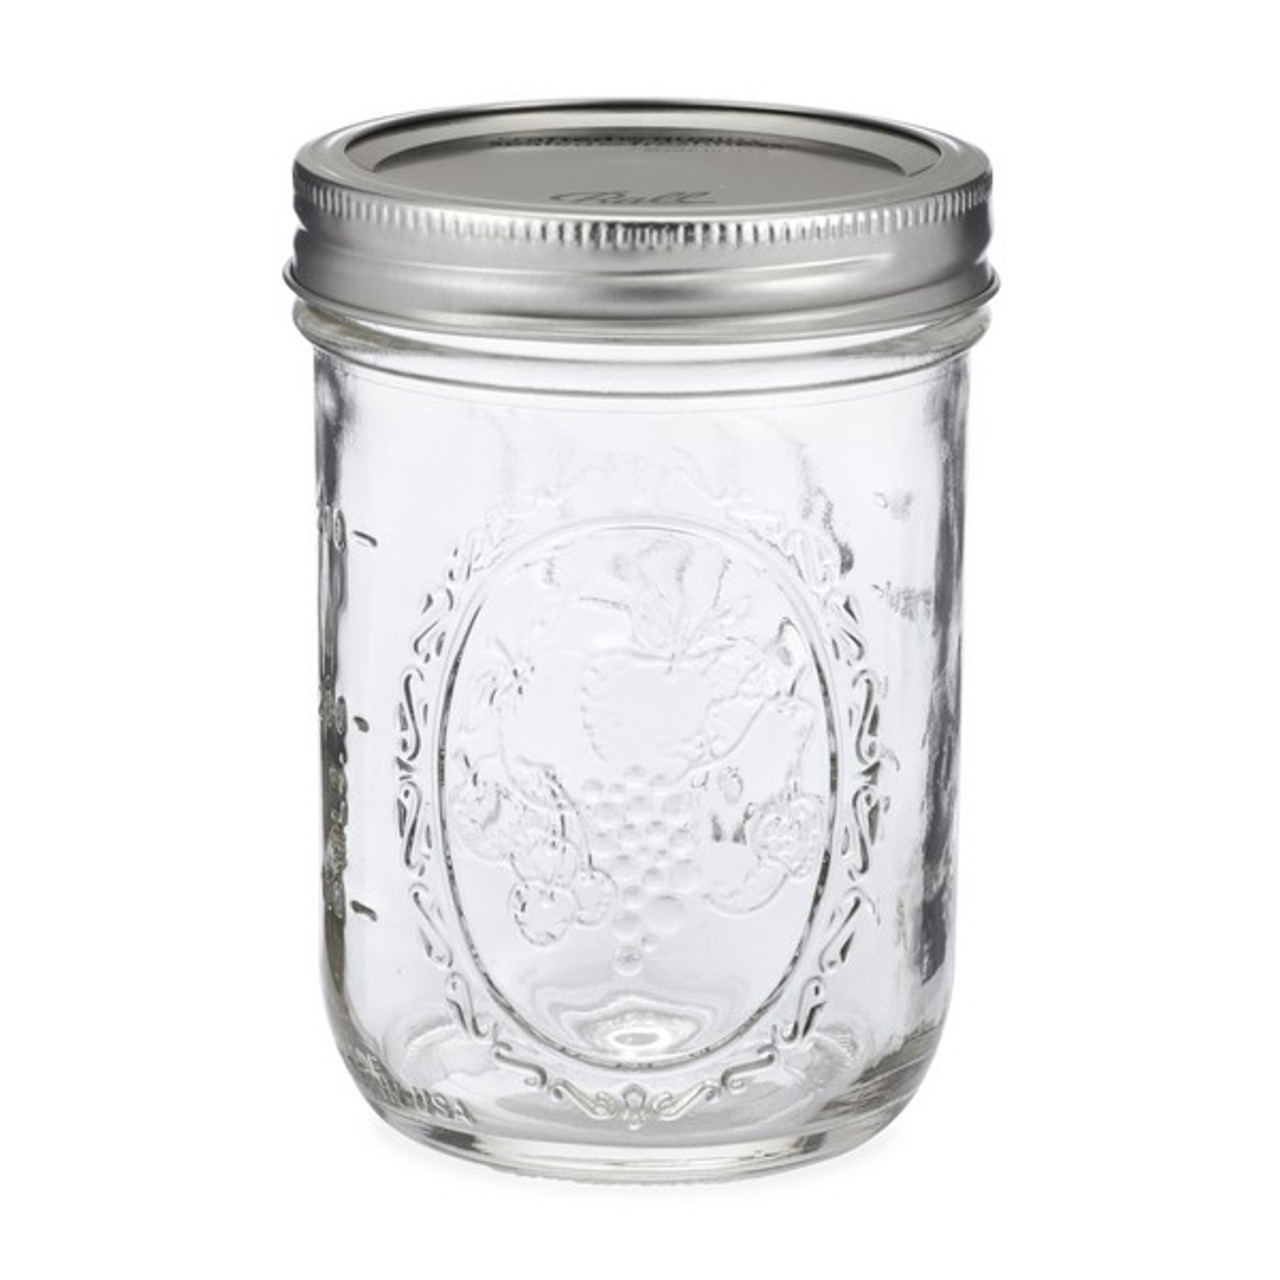 Ball® Wide Mouth Glass Canning Jars - 32 oz